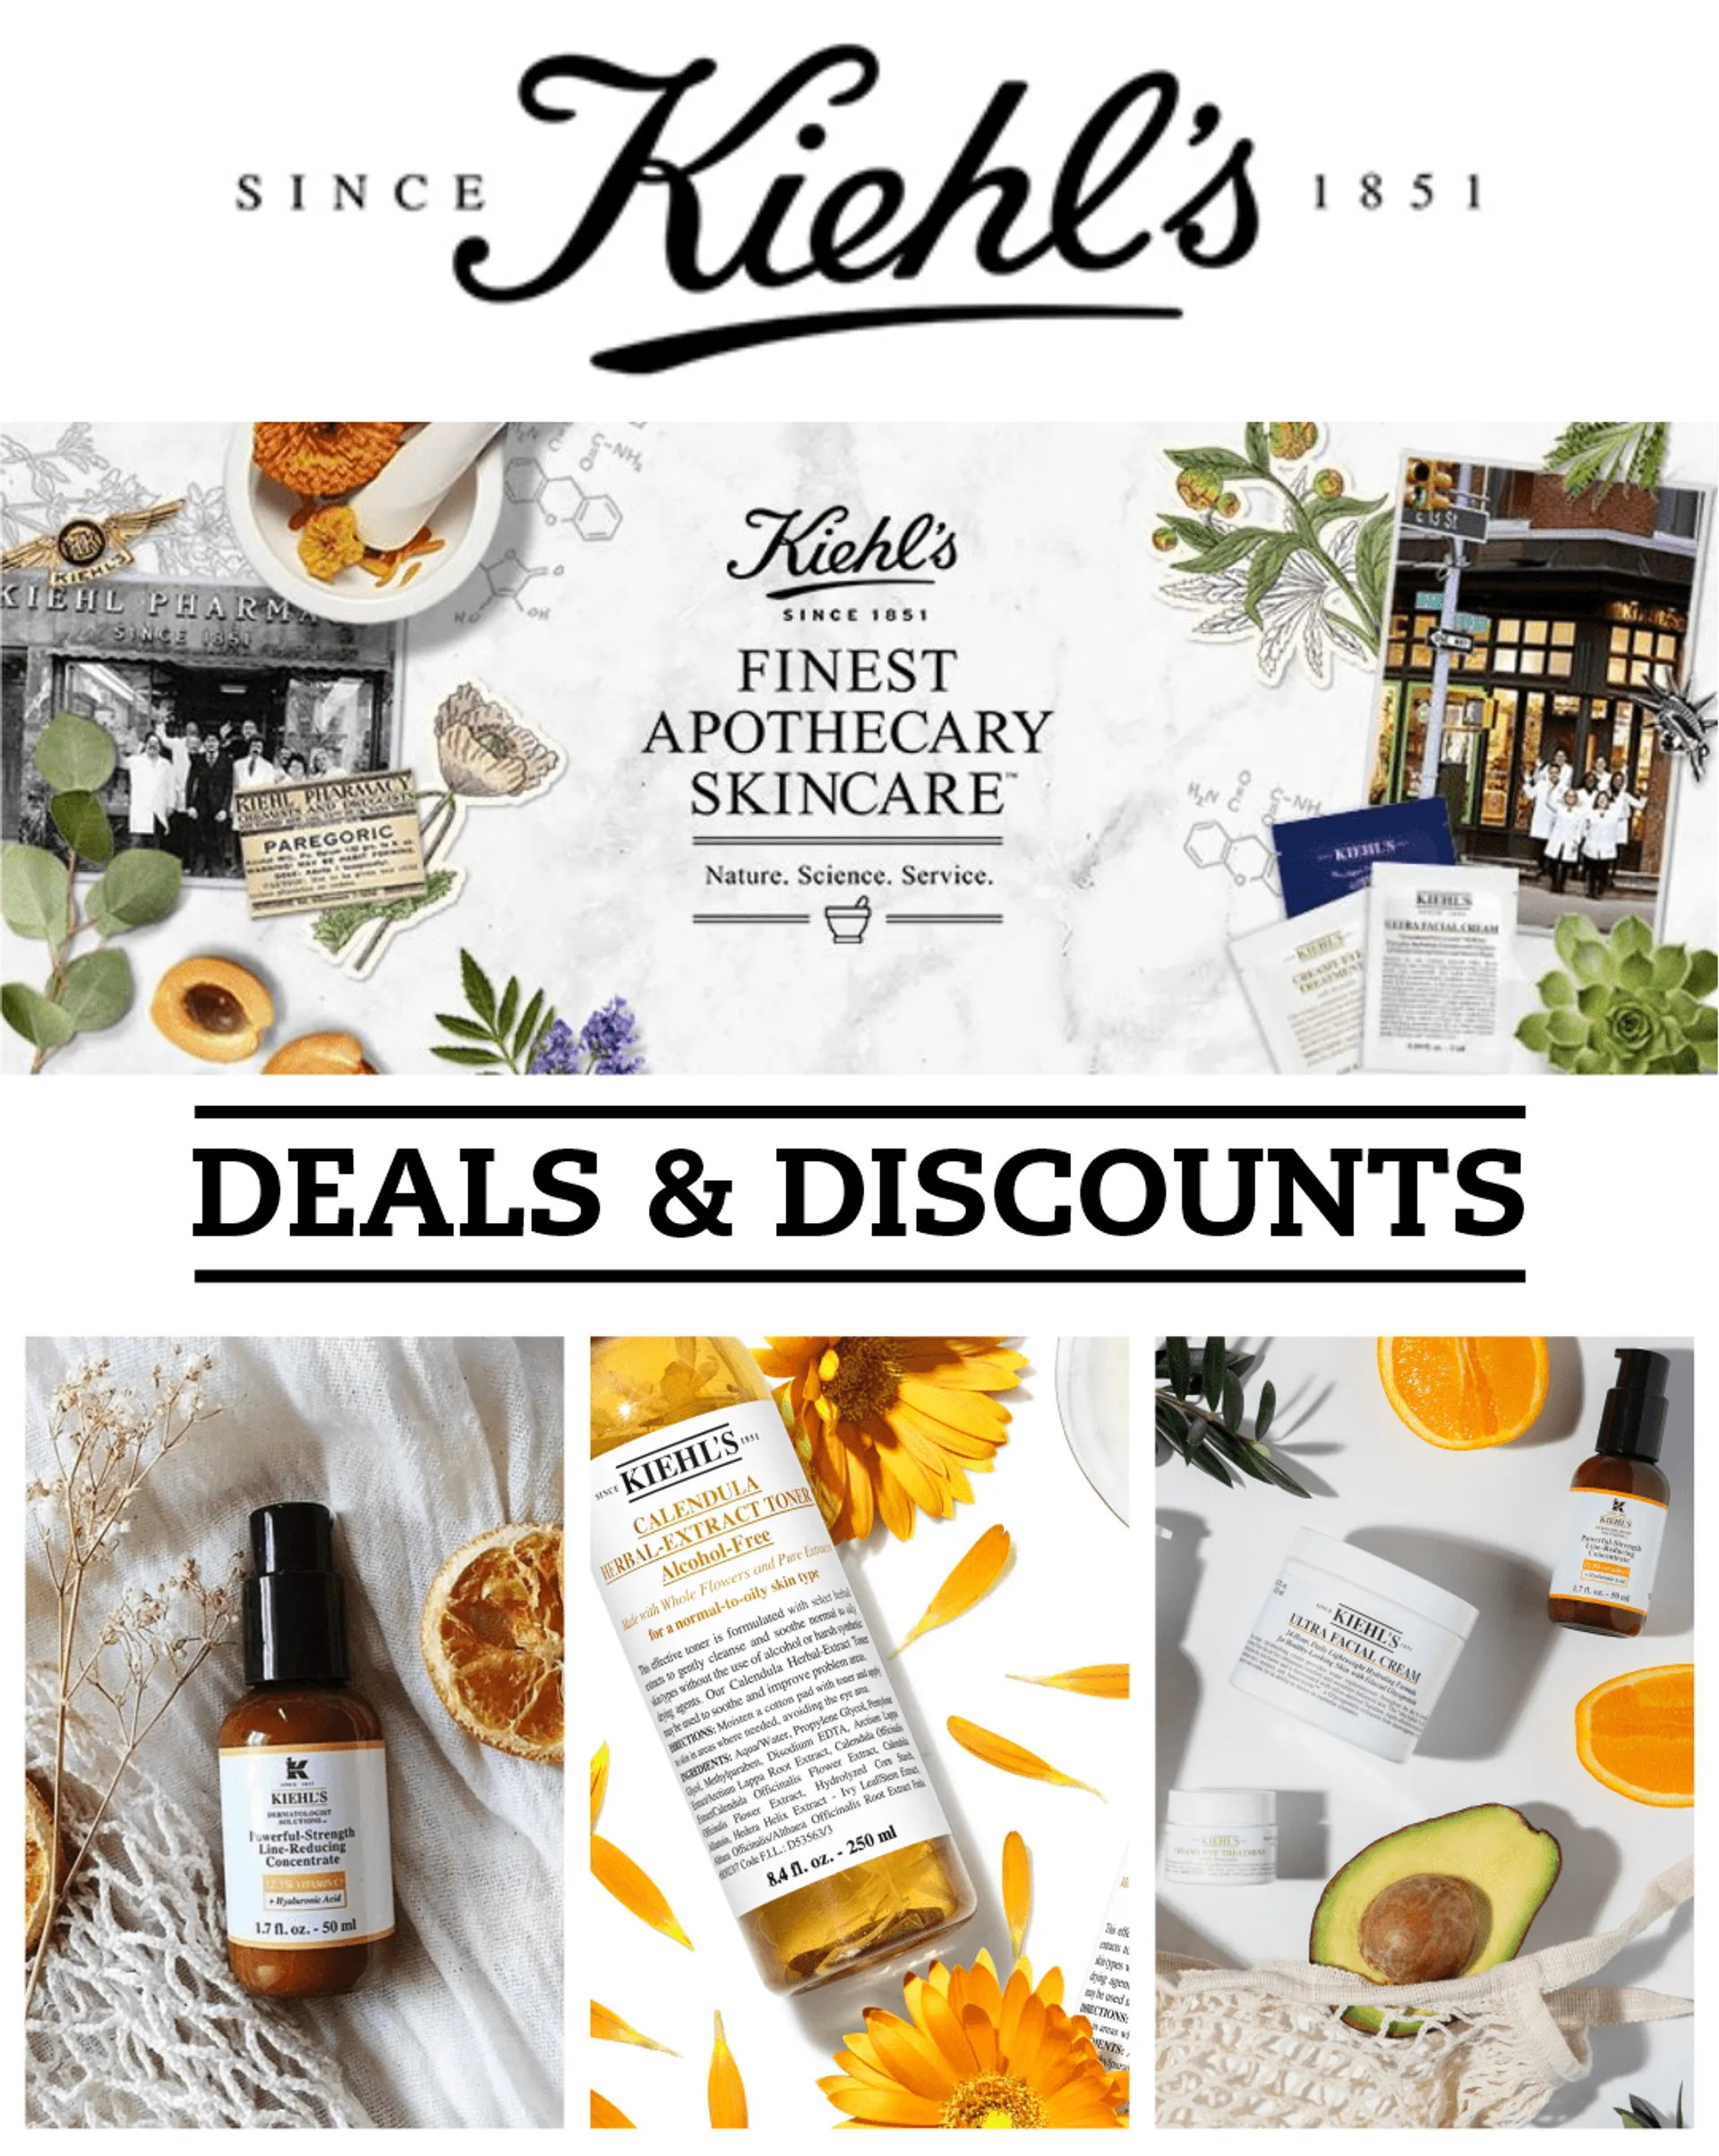 Kiehl's - Health and Beauty - 18 May 23 May 2023 - Page 1